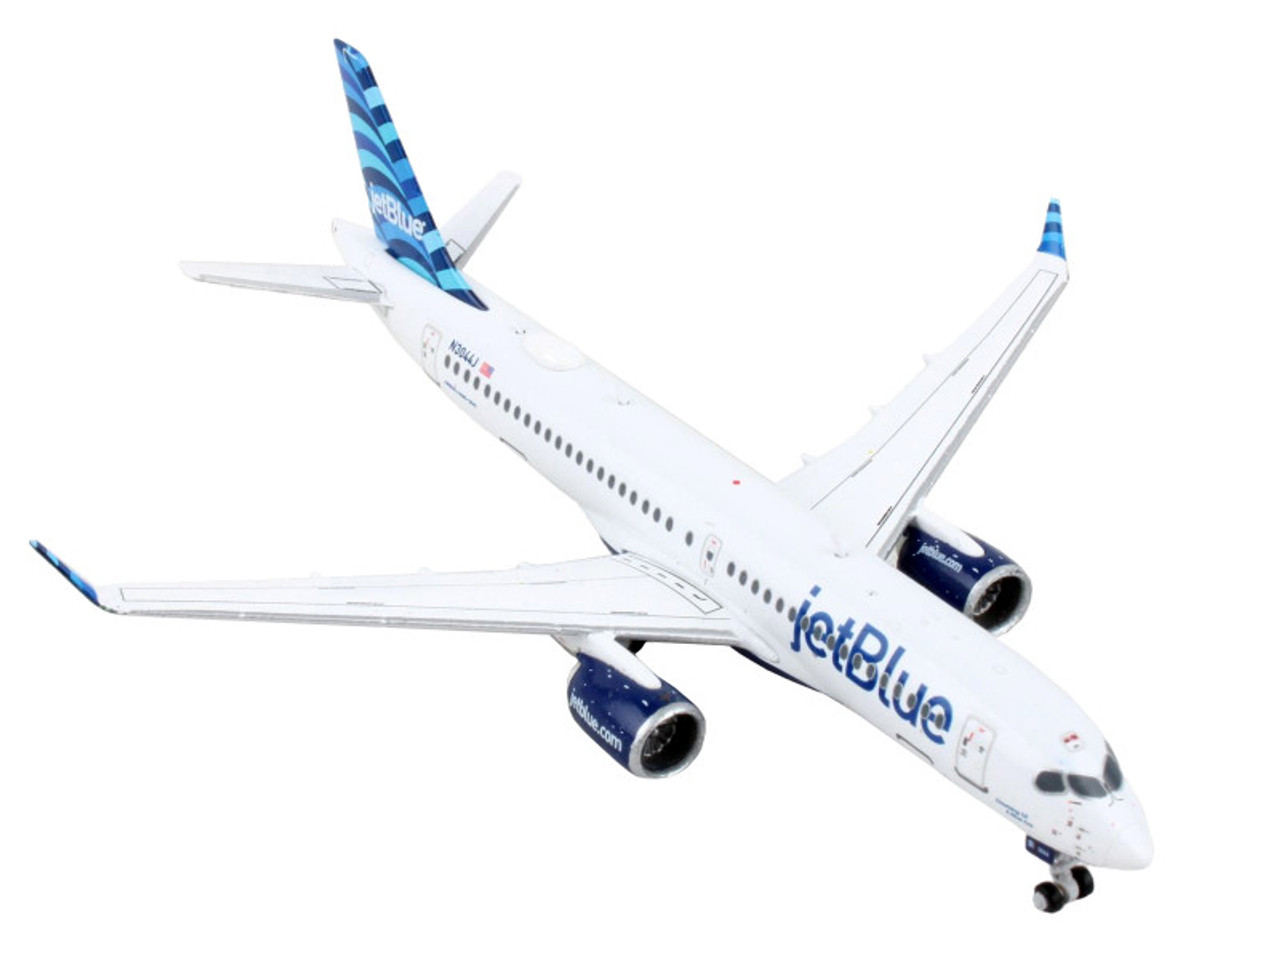 Airbus A220-300 Commercial Aircraft "JetBlue Airways" White with Blue Tail 1/400 Diecast Model Airplane by GeminiJets